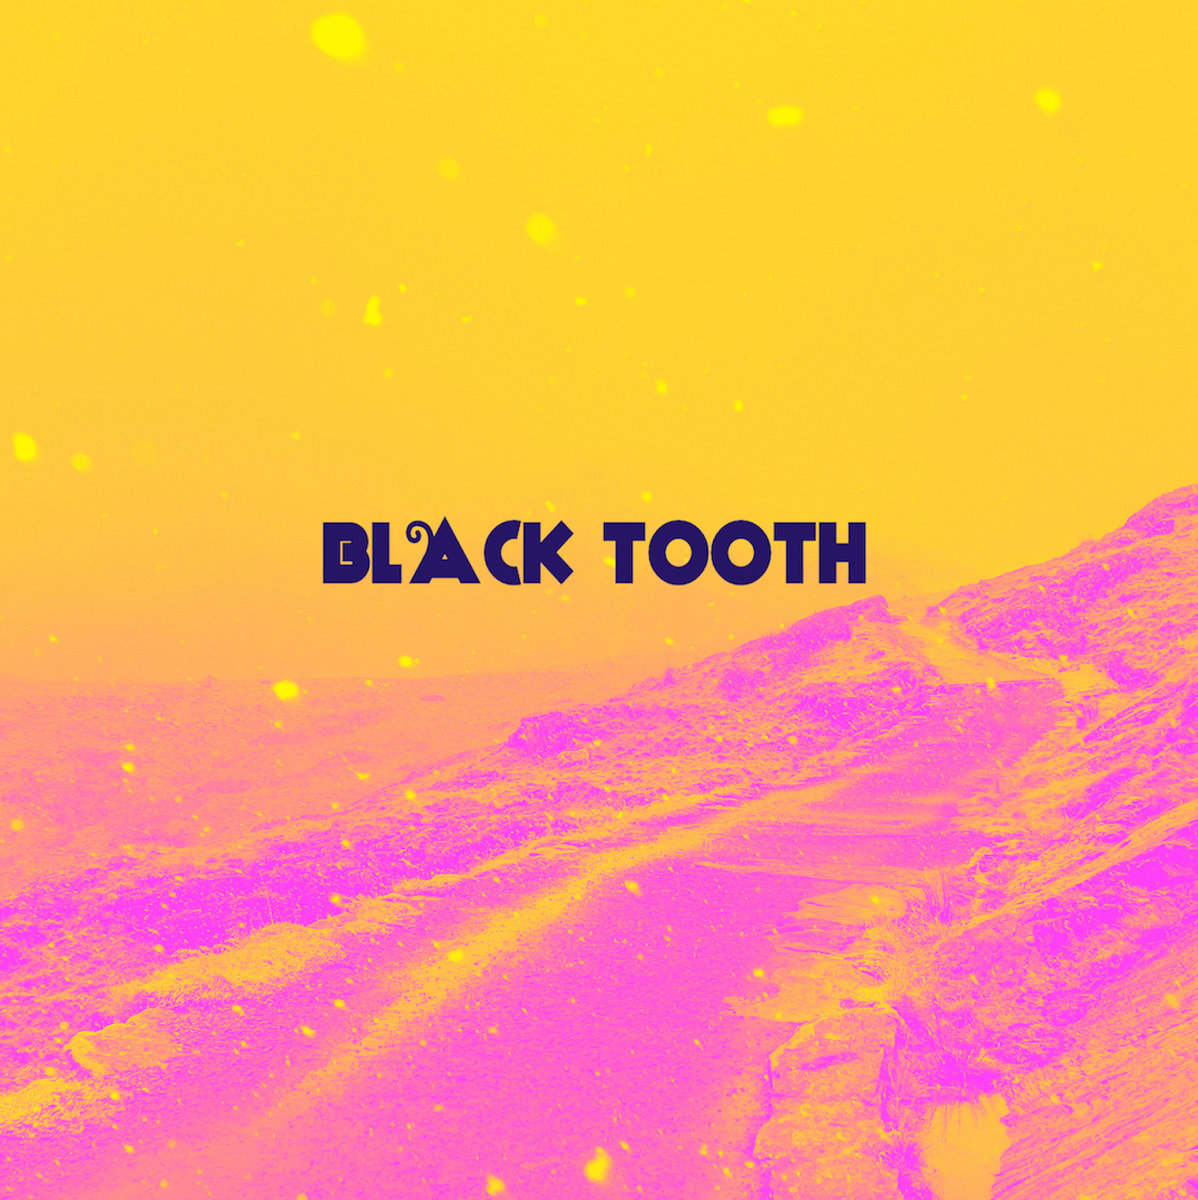 Black Tooth - Black Tooth EP